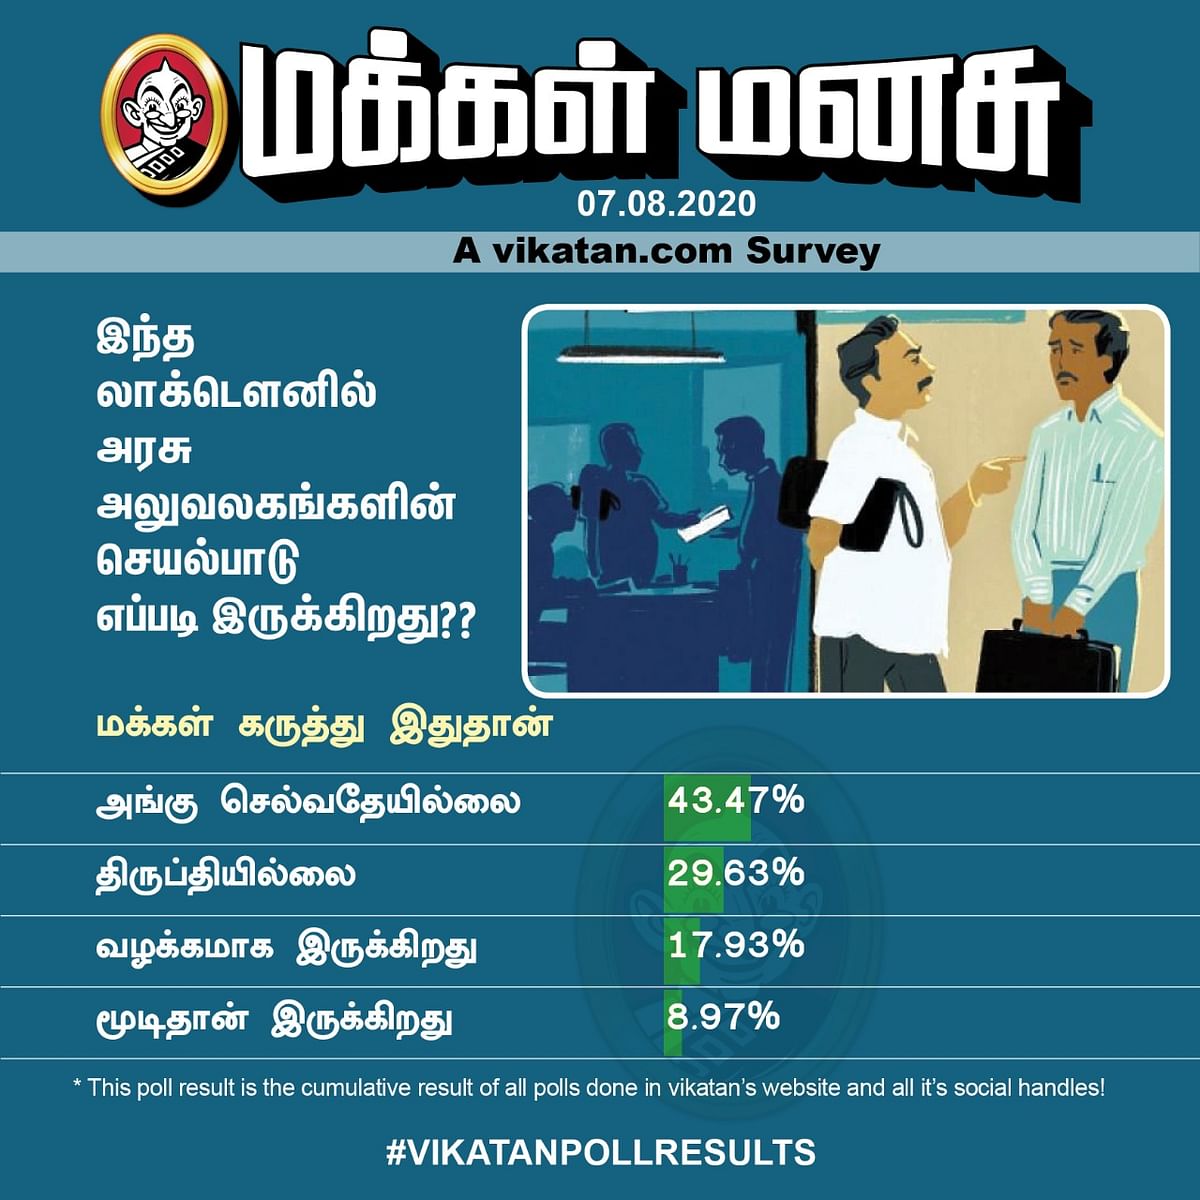 Government Offices | Vikatan Poll